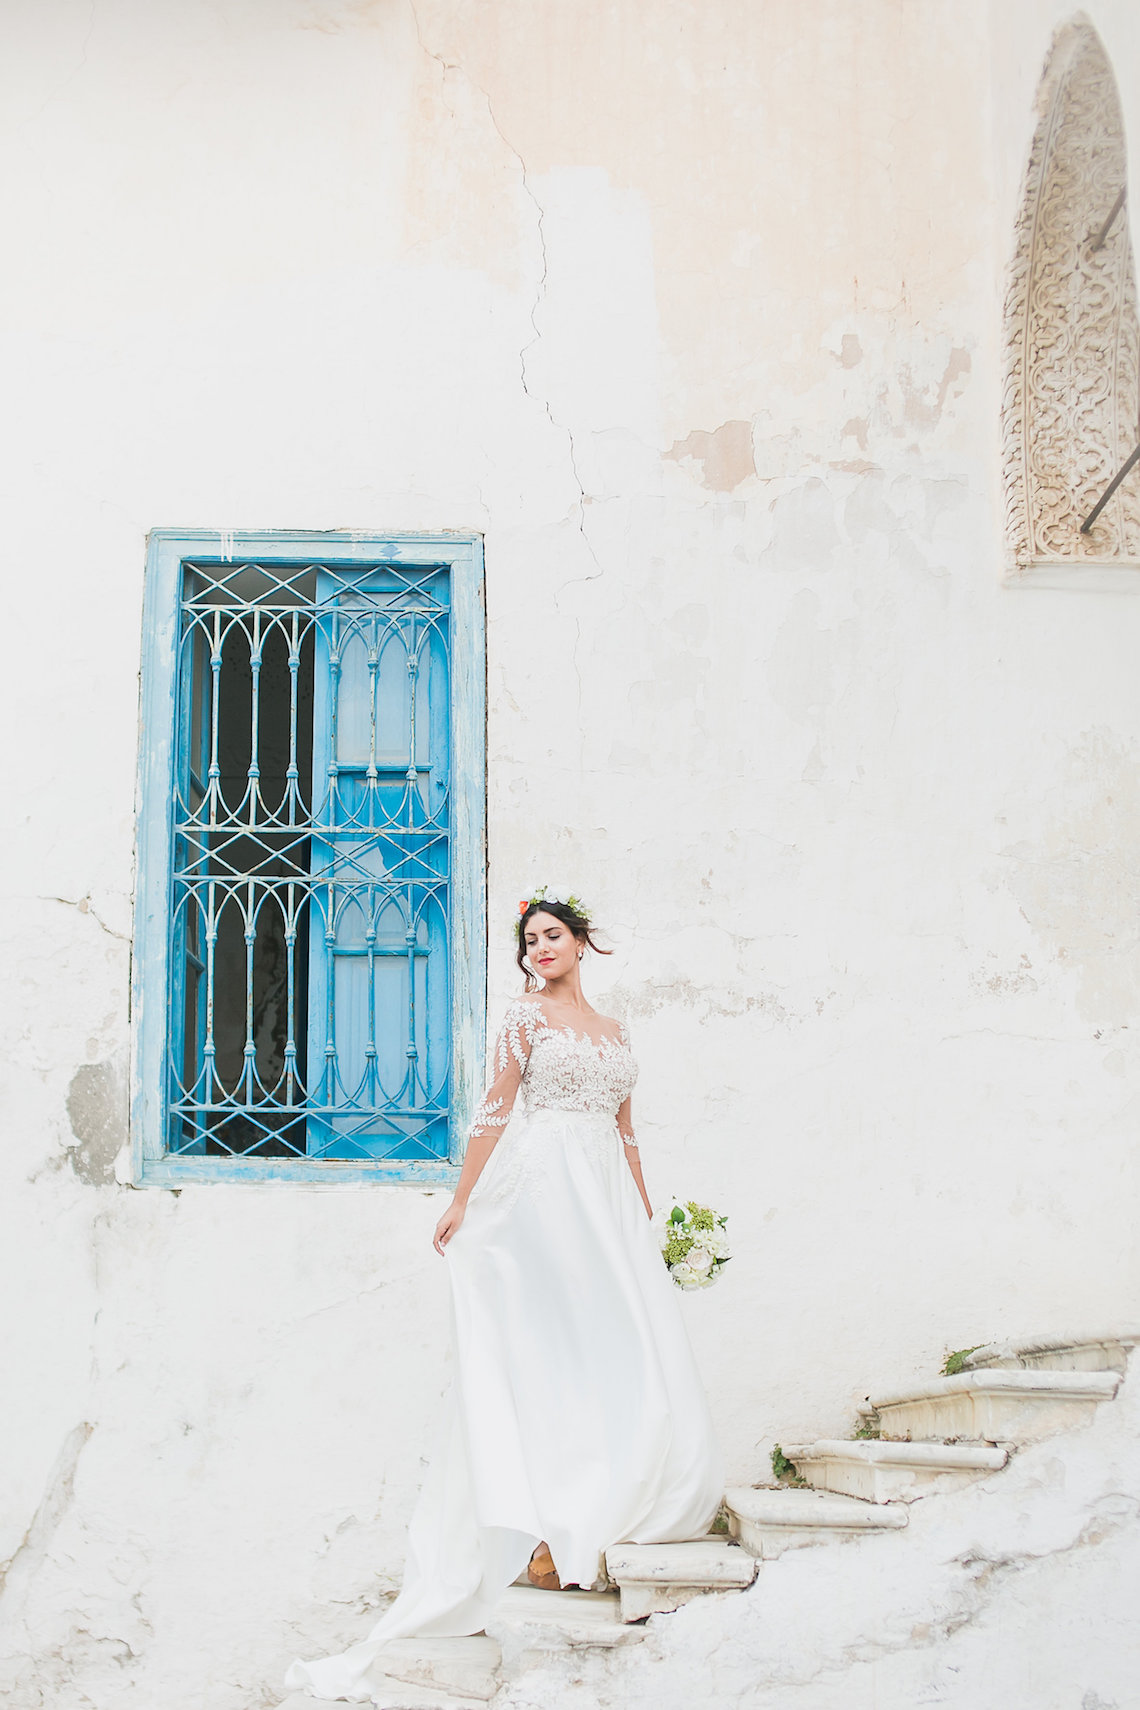 Mediterranean Meets Africa; Colorful Tunisian Wedding Inspiration | Ness Photography 23